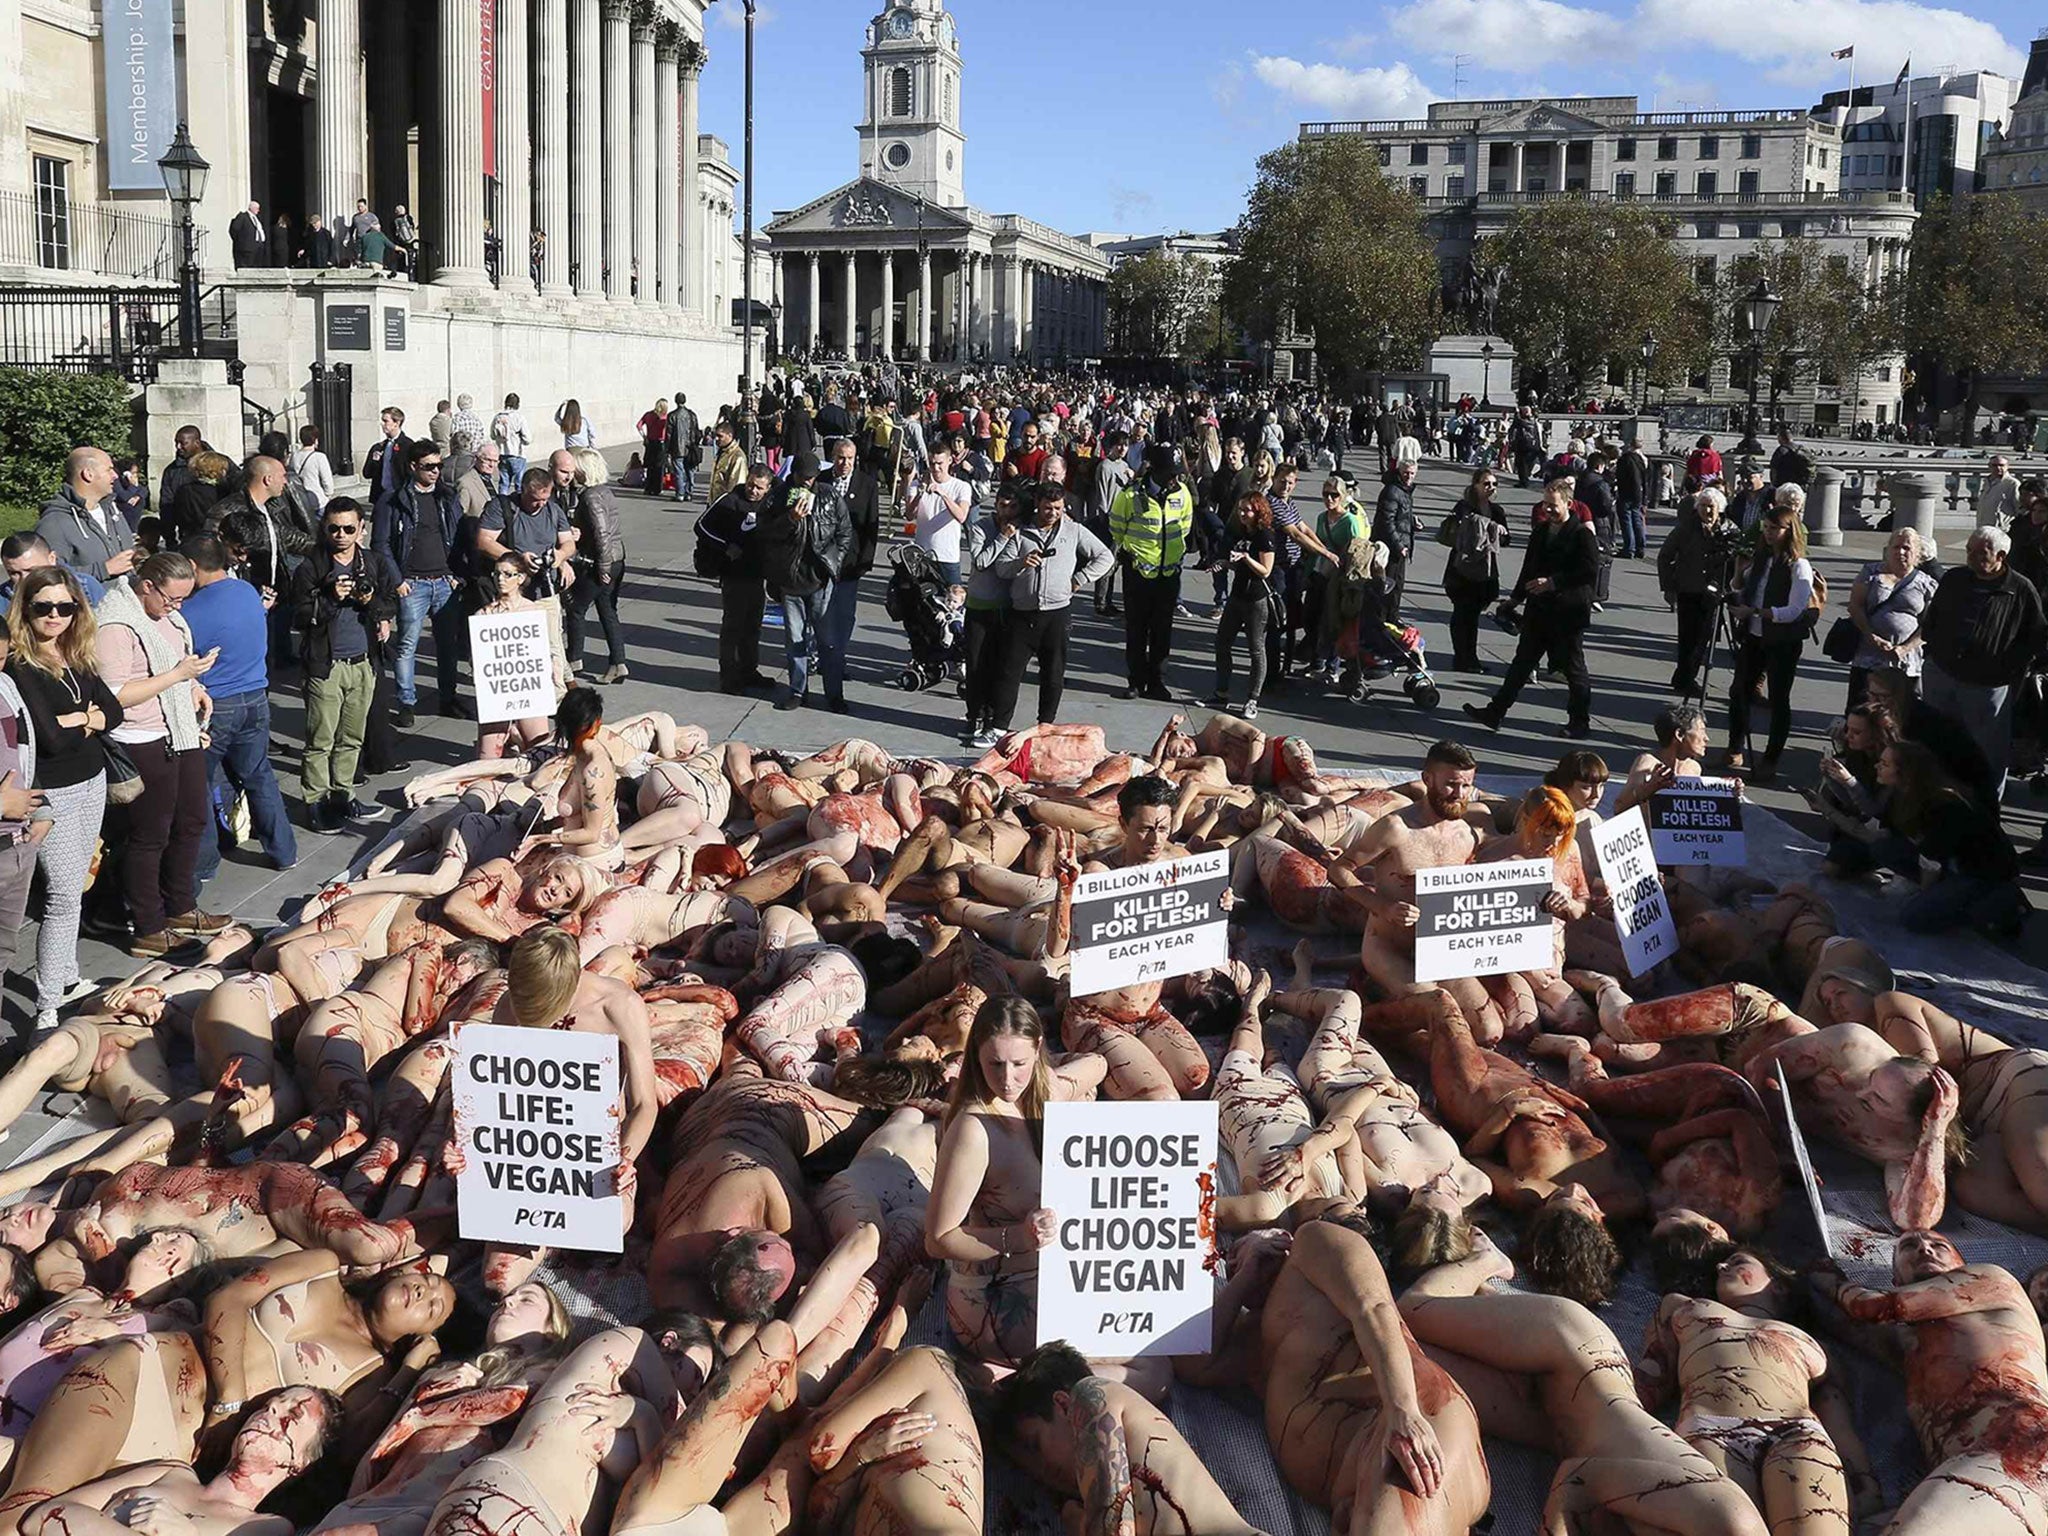 Supporters of People for the Ethical Treatment of Animals (PETA) gather to lie in a heap in Trafalgar Square to raise awareness on World Vegan Day